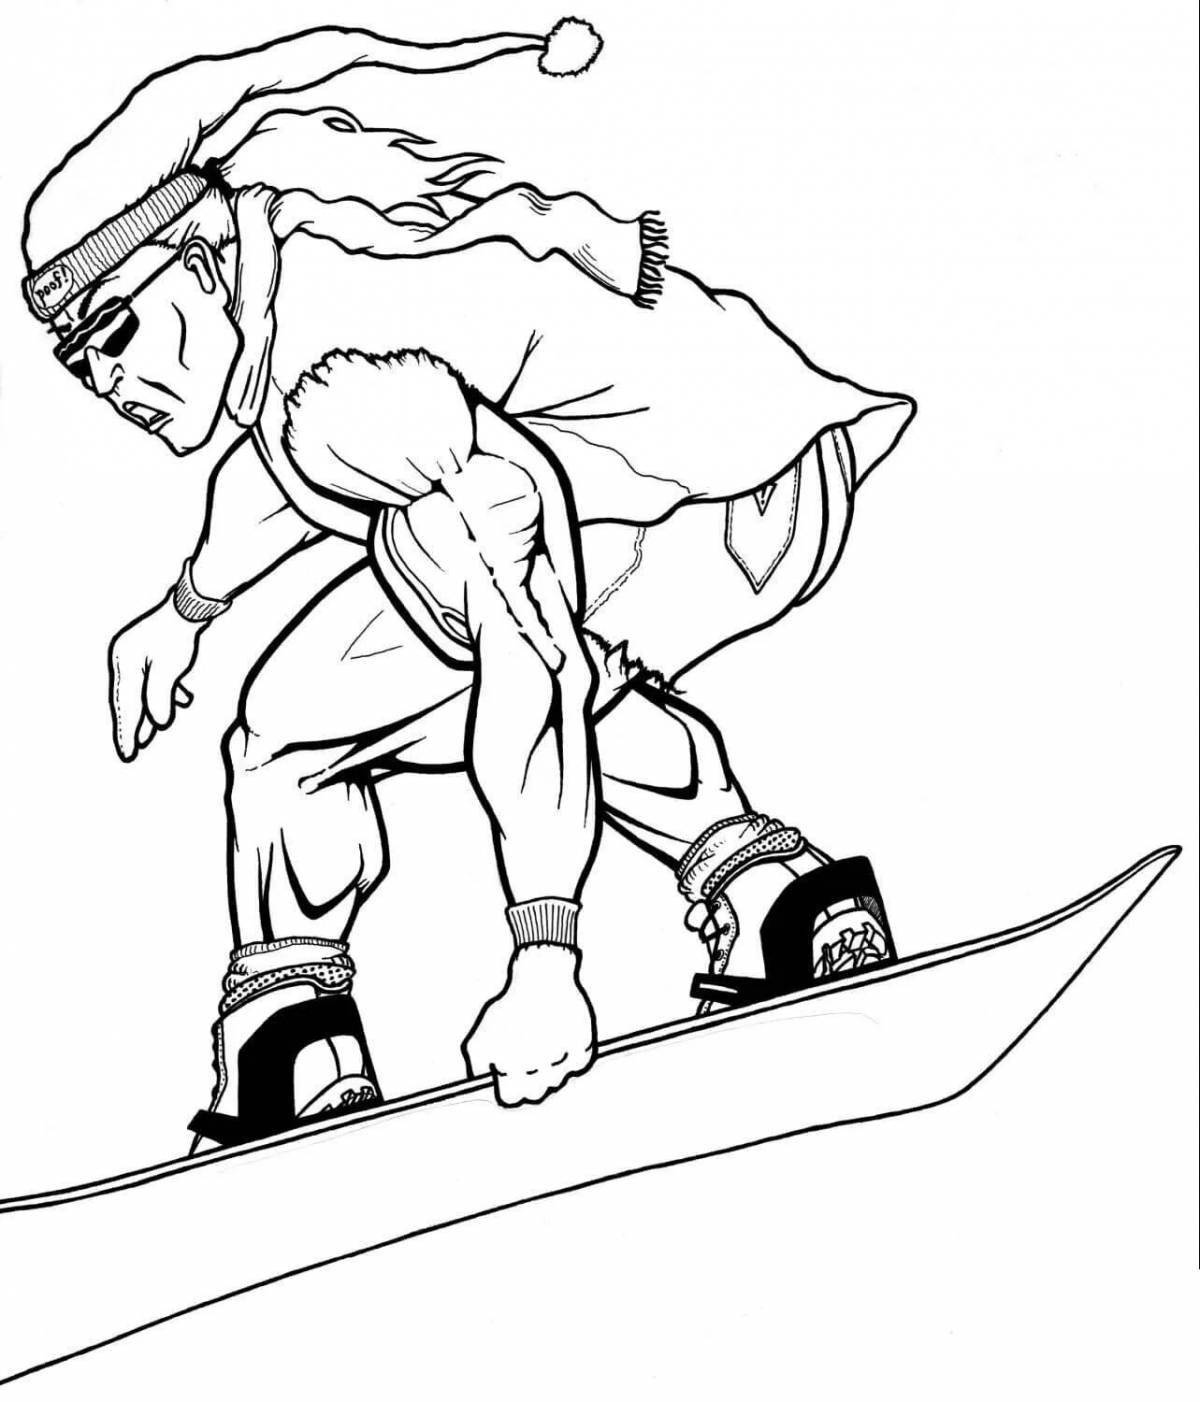 Fabulous snowboard coloring page for kids